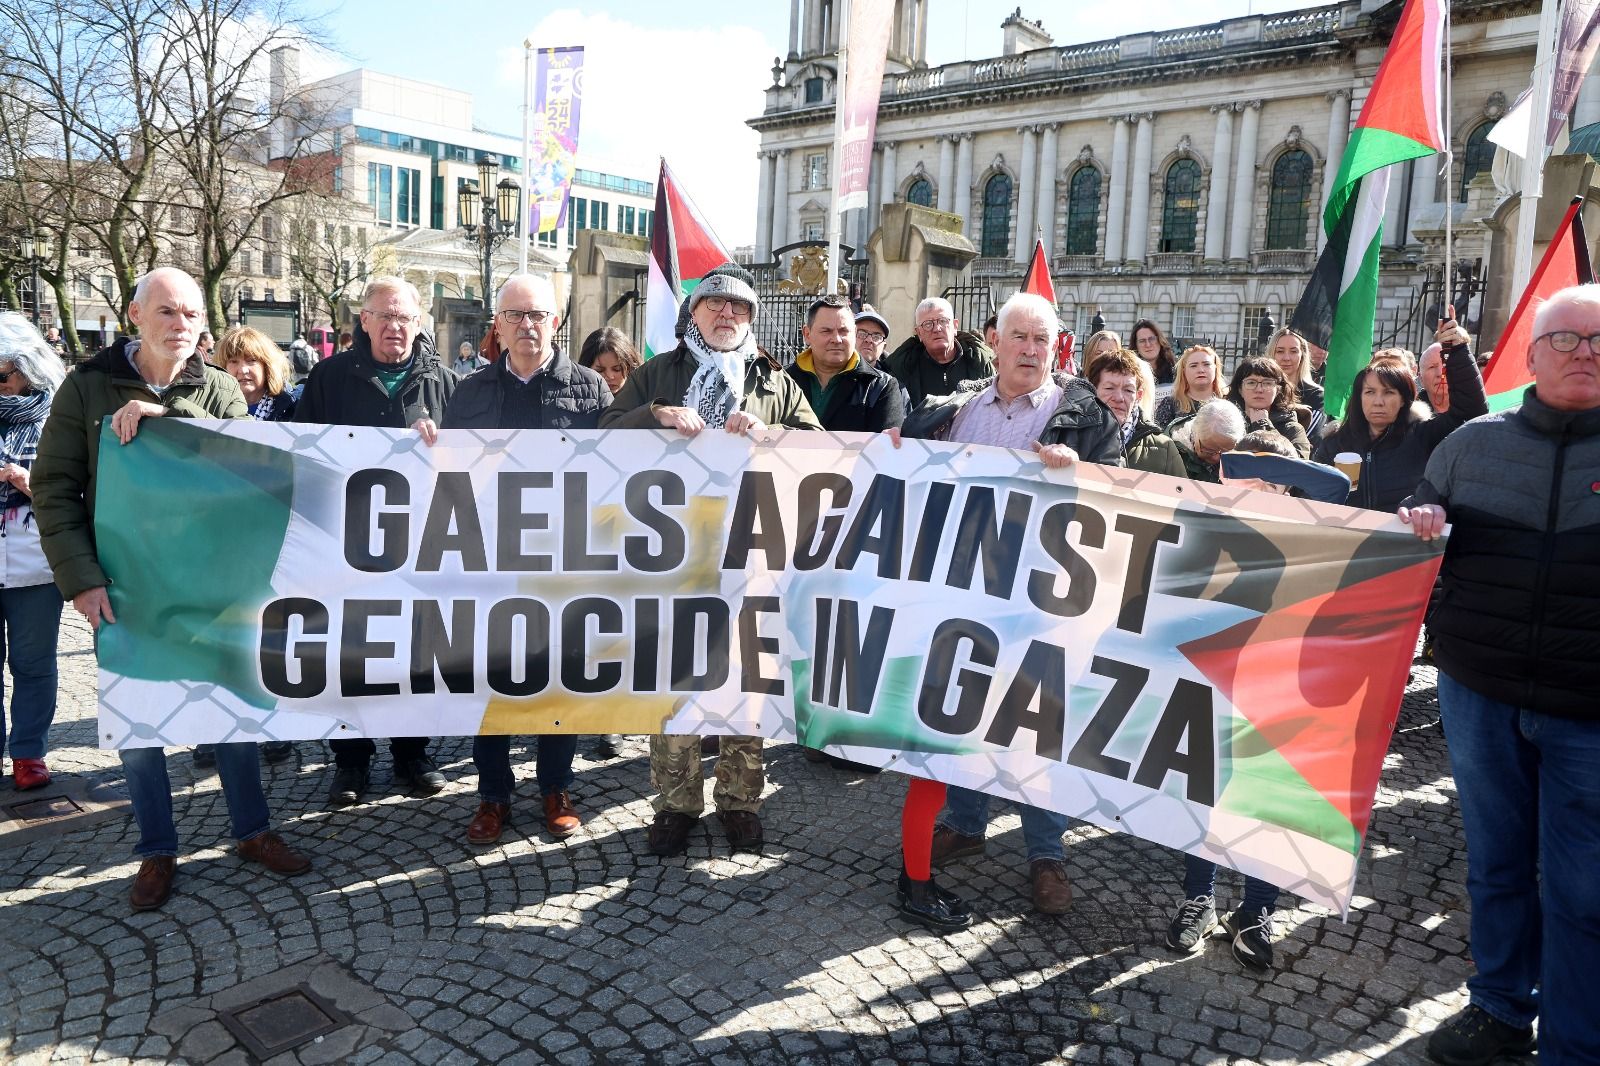 SLAUGHTER: Gaels Against Genocide in Gaza held a vigil on Good Friday to remember the 32,000+ Palestinians who have been killed by israel